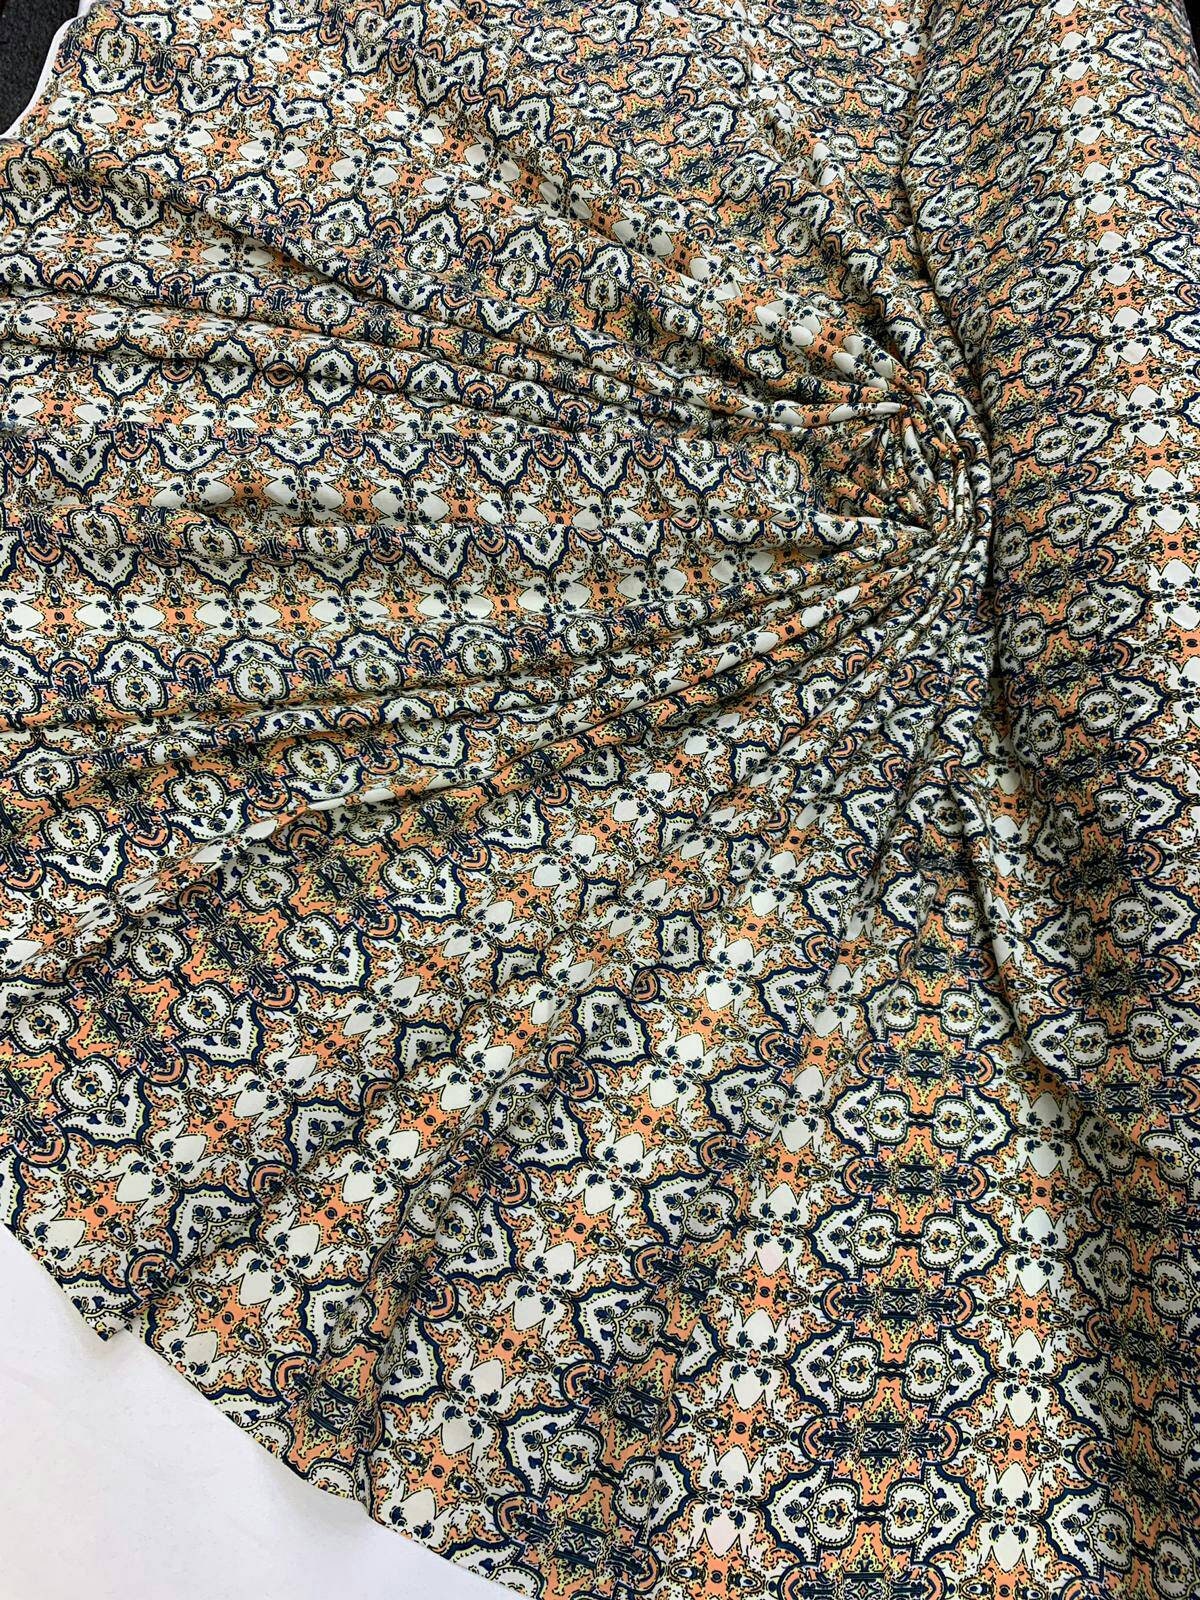 Rayon with White Background &orange and blue paisleys Print Fabric by the yard India inspired soft flowy organic kids dress draping clothing